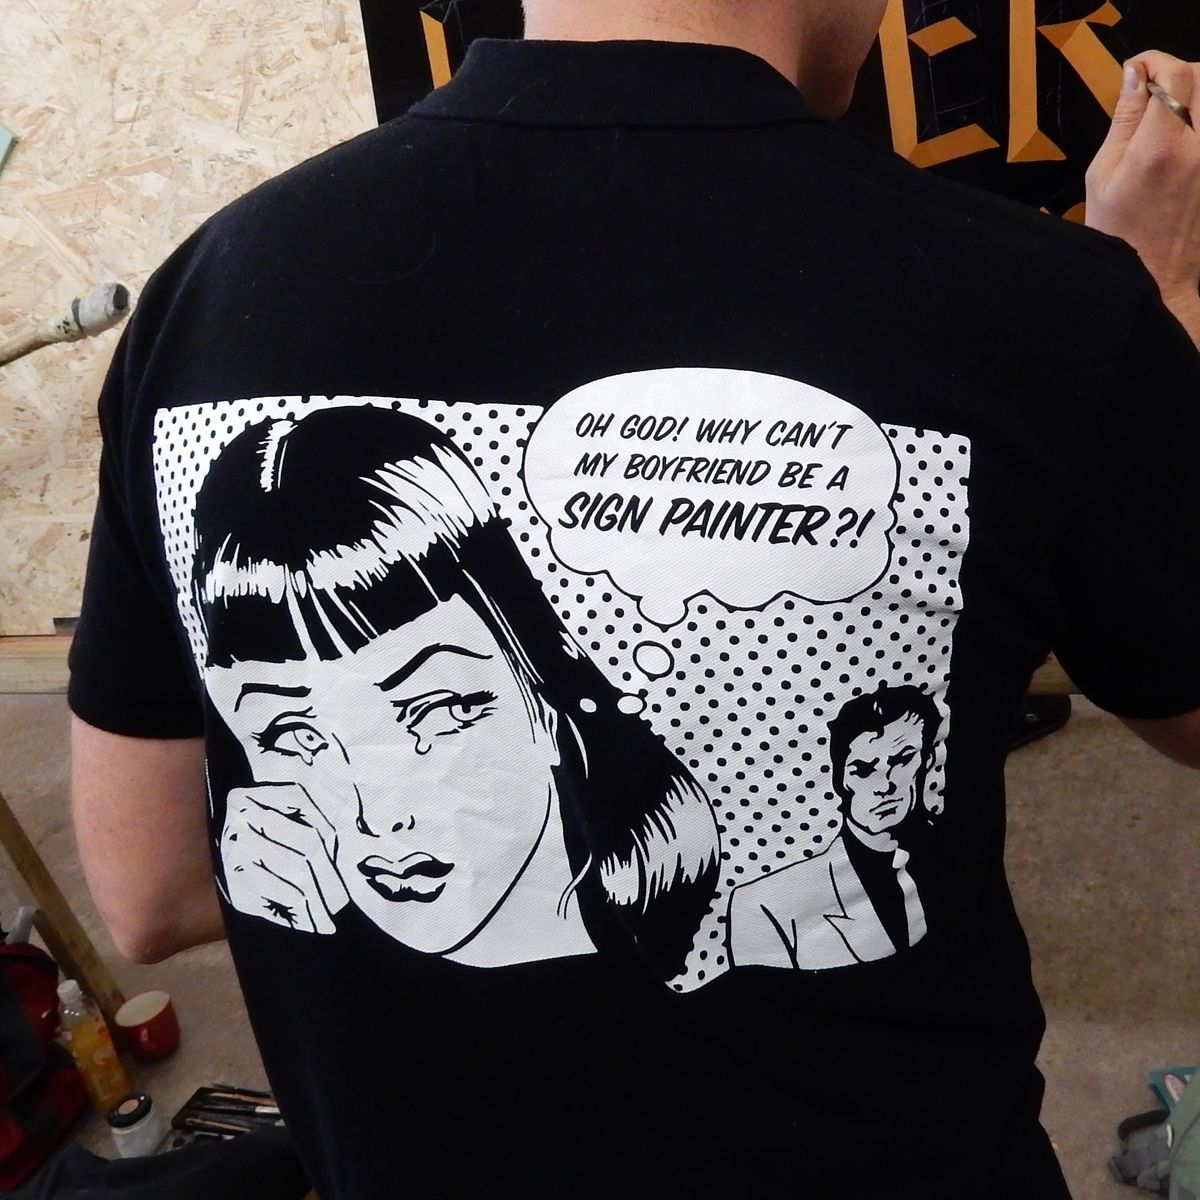 T-shirt in Pop Art style with picture of a woman crying saying "Oh God! Why can't my boyfriend be a sign painter?!"